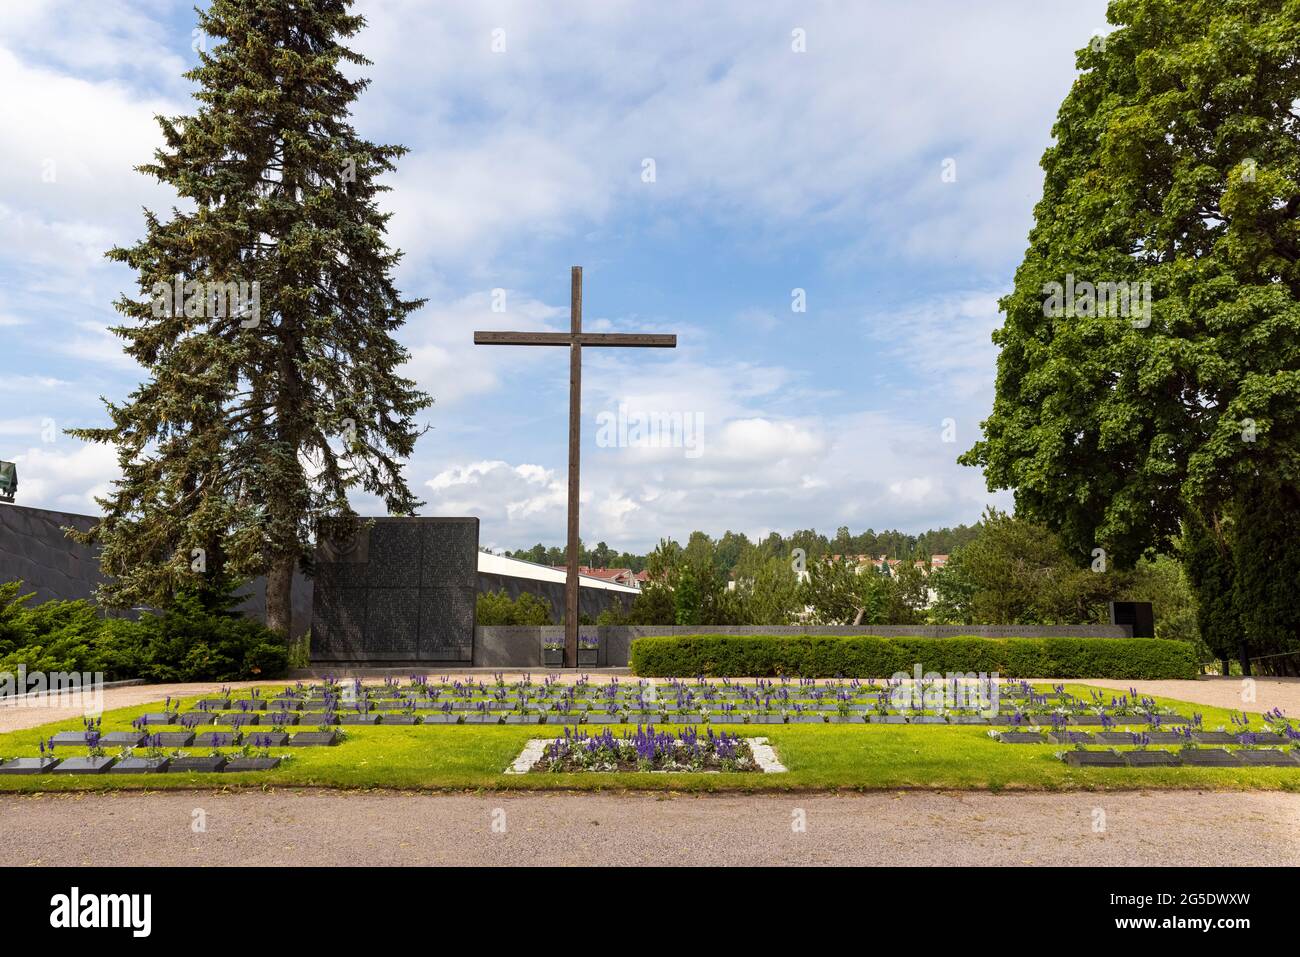 Memorial for soldiers died in World War II in Southern Finnish town Kirkkonummi Stock Photo